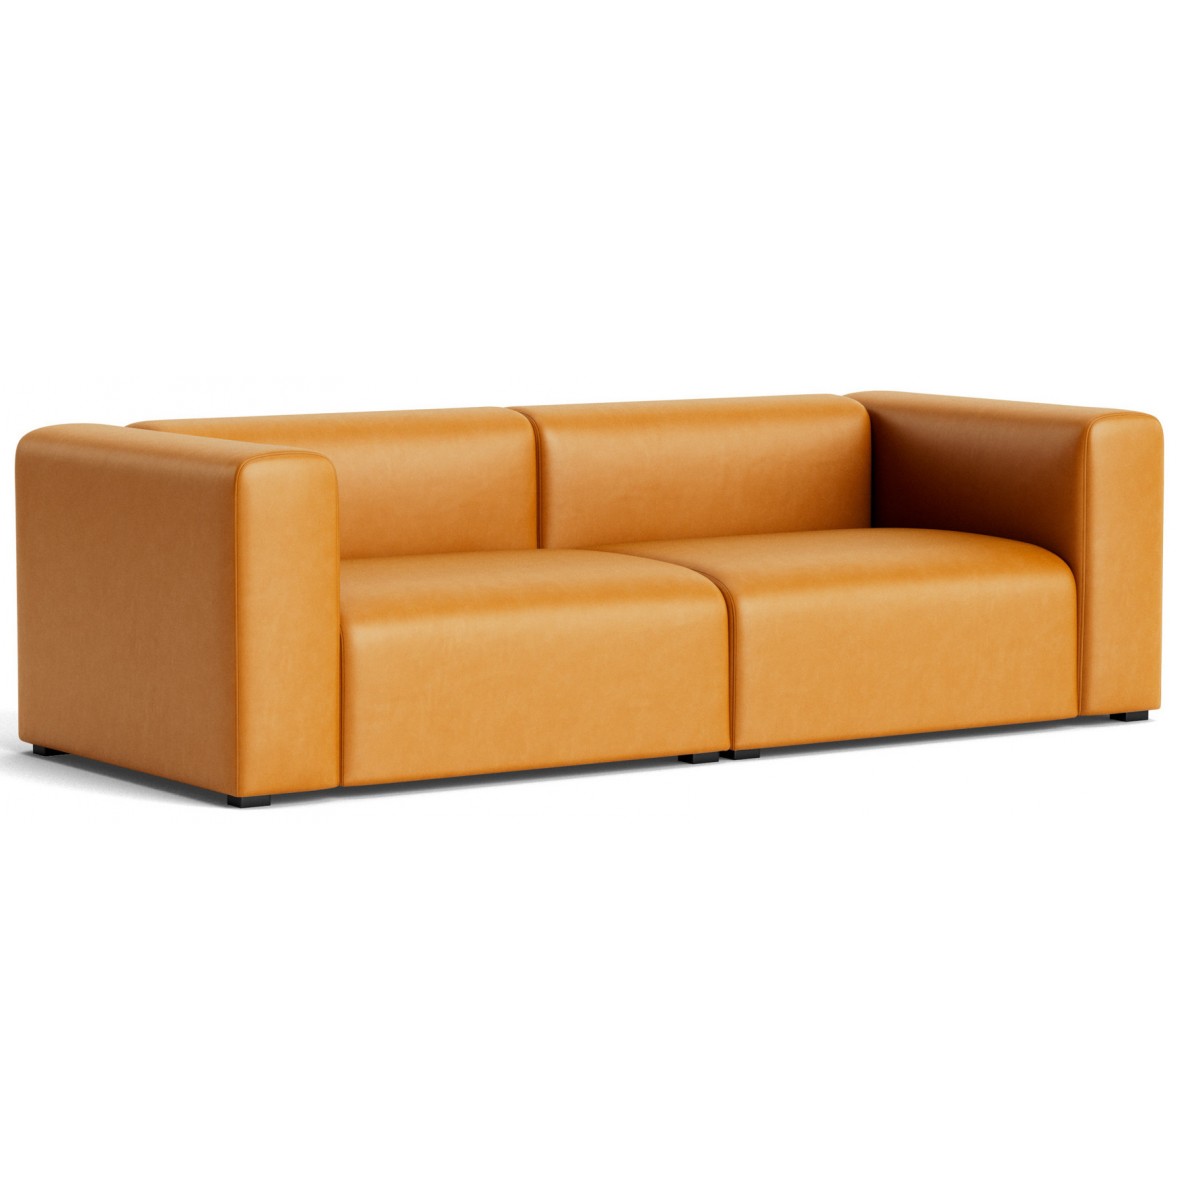 Sense cognac leather - Mags 2.5-seater – Comb. 1